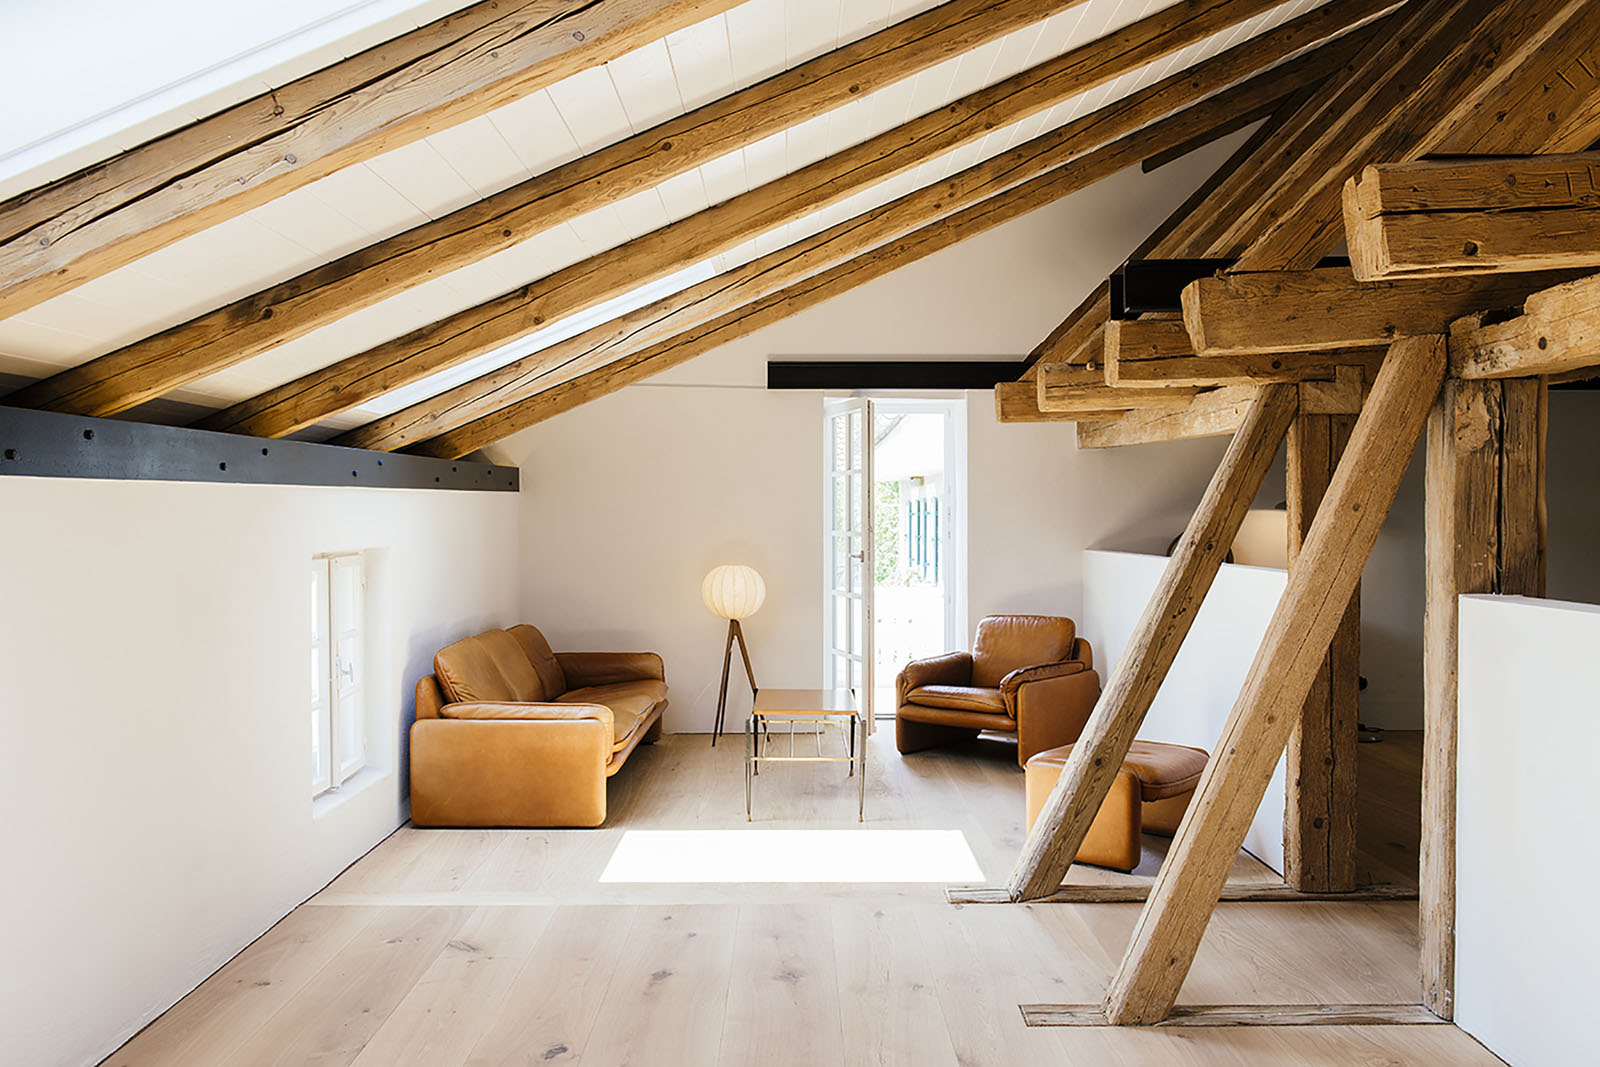 Renovated Attic Space with Exposed Wood Beams